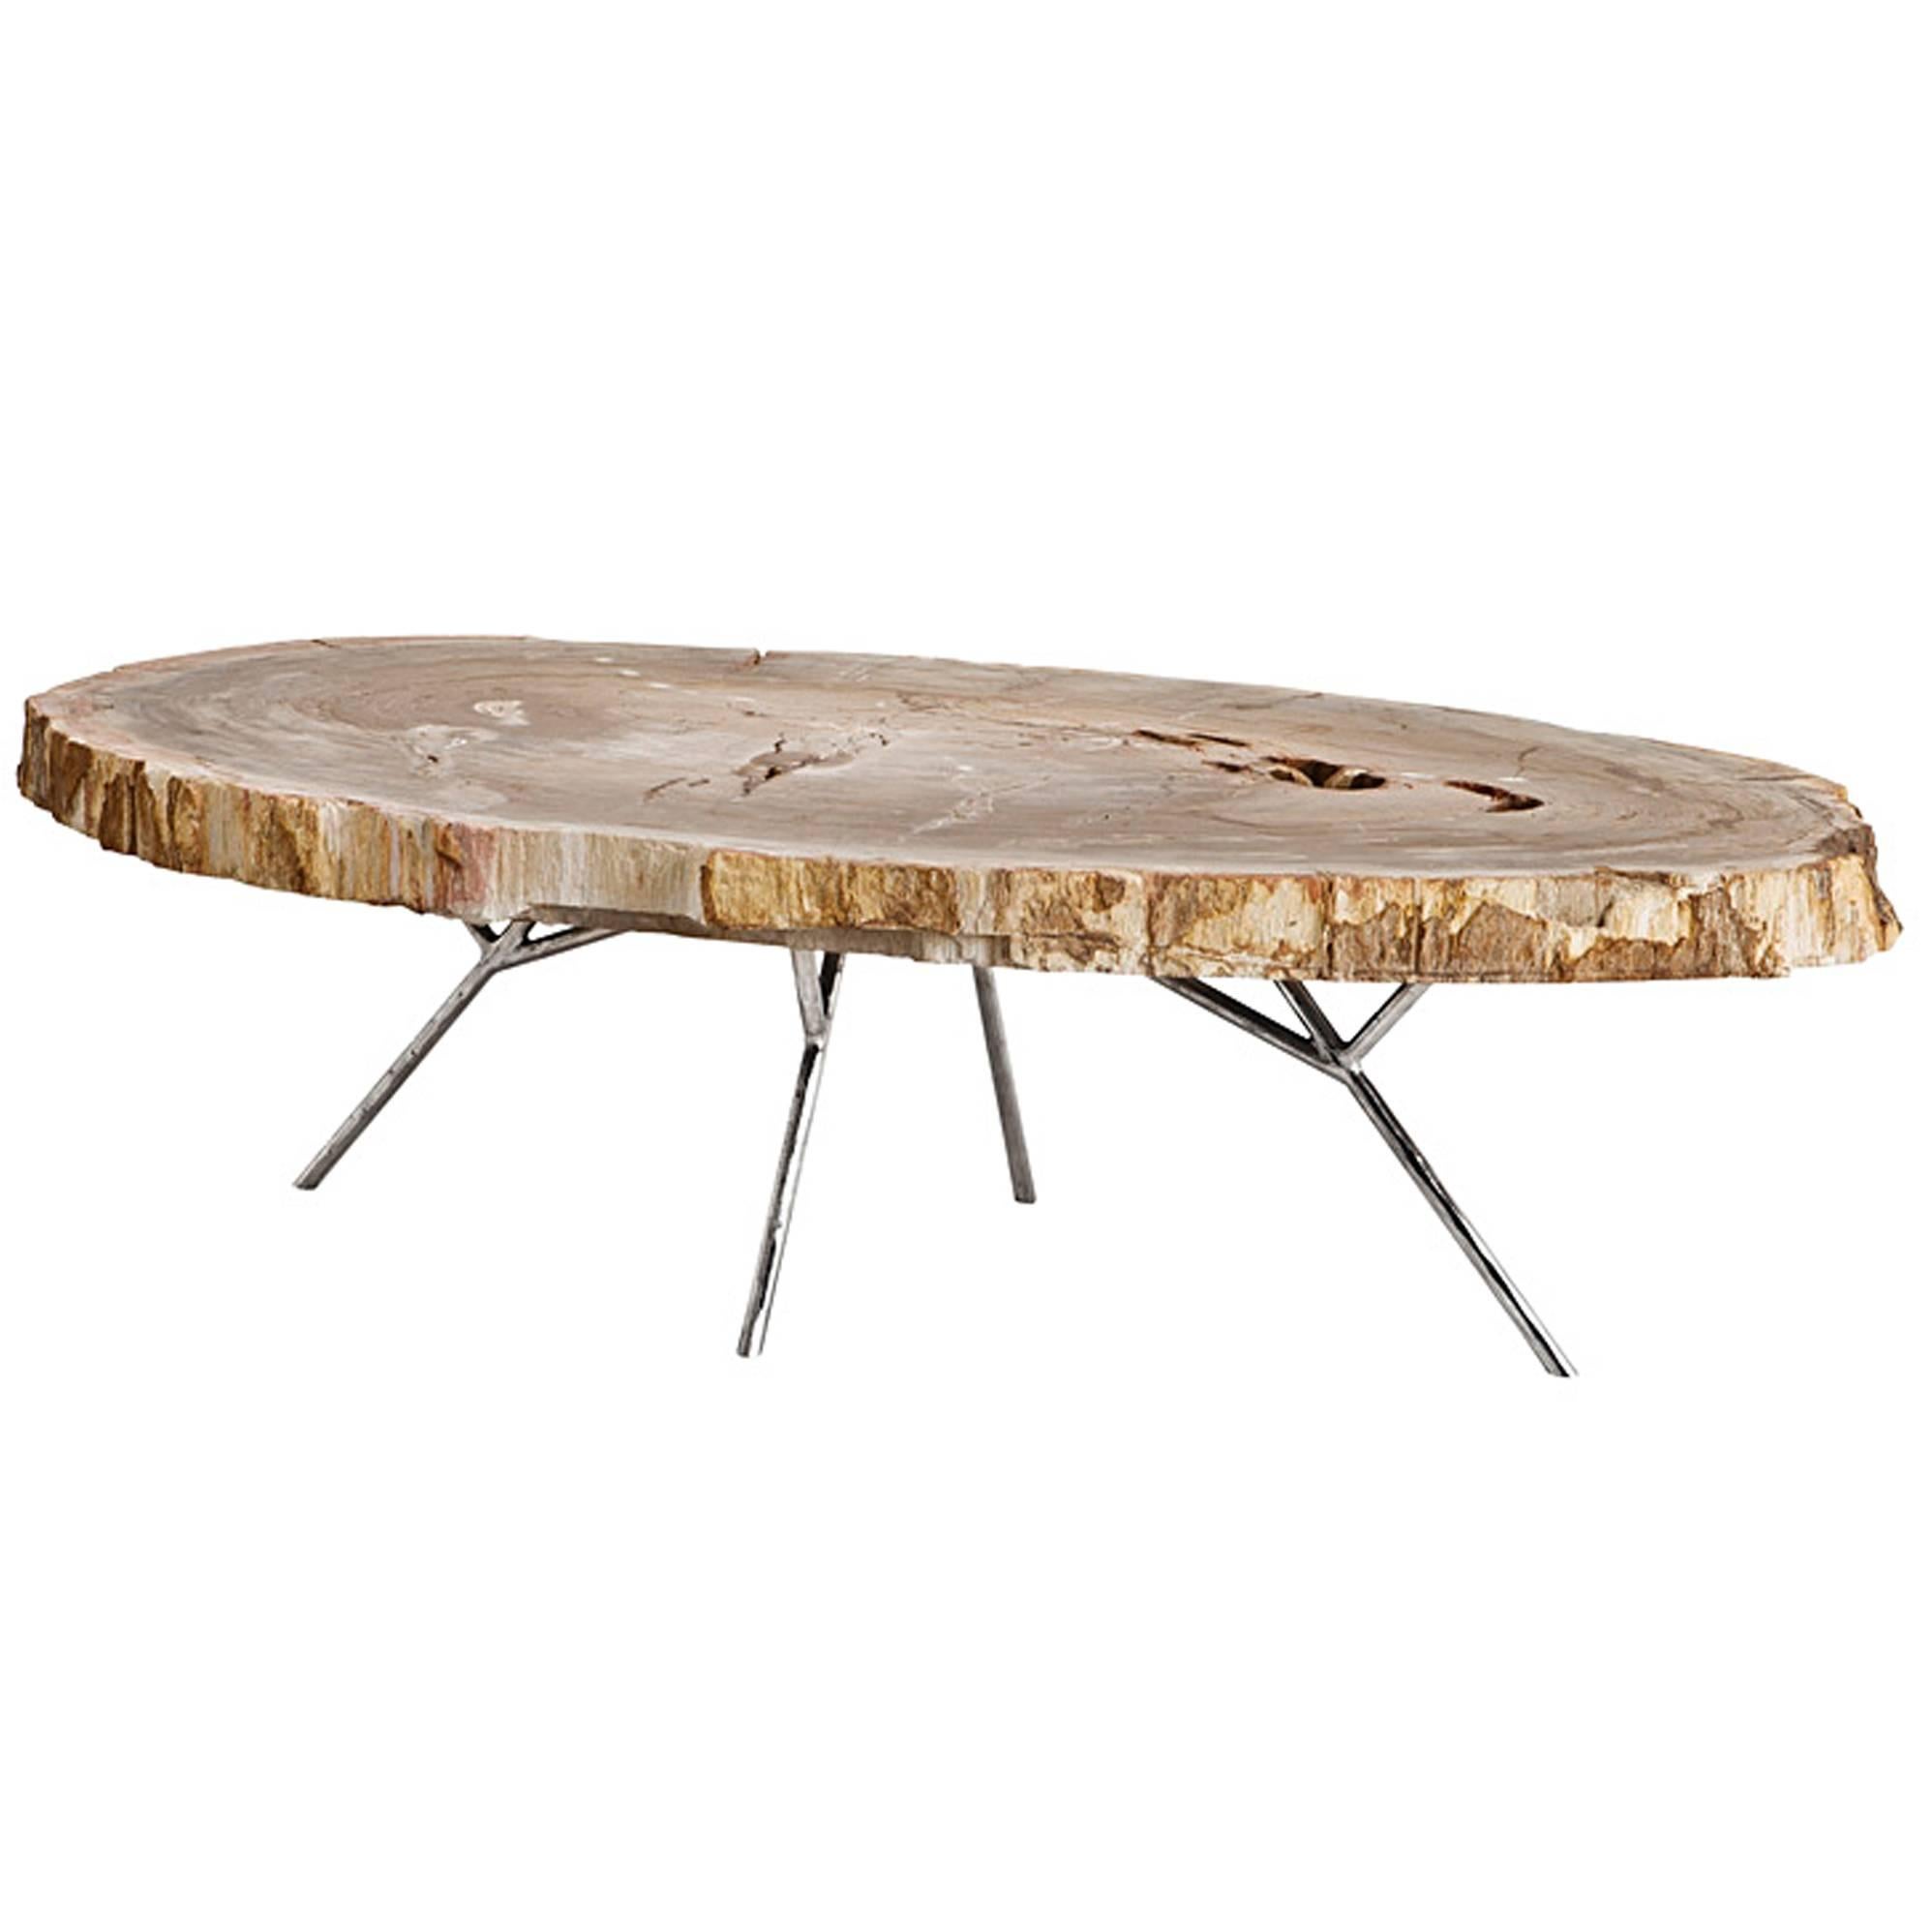 Stoned Petrified Wood Coffee Table on Stainless Steel Base